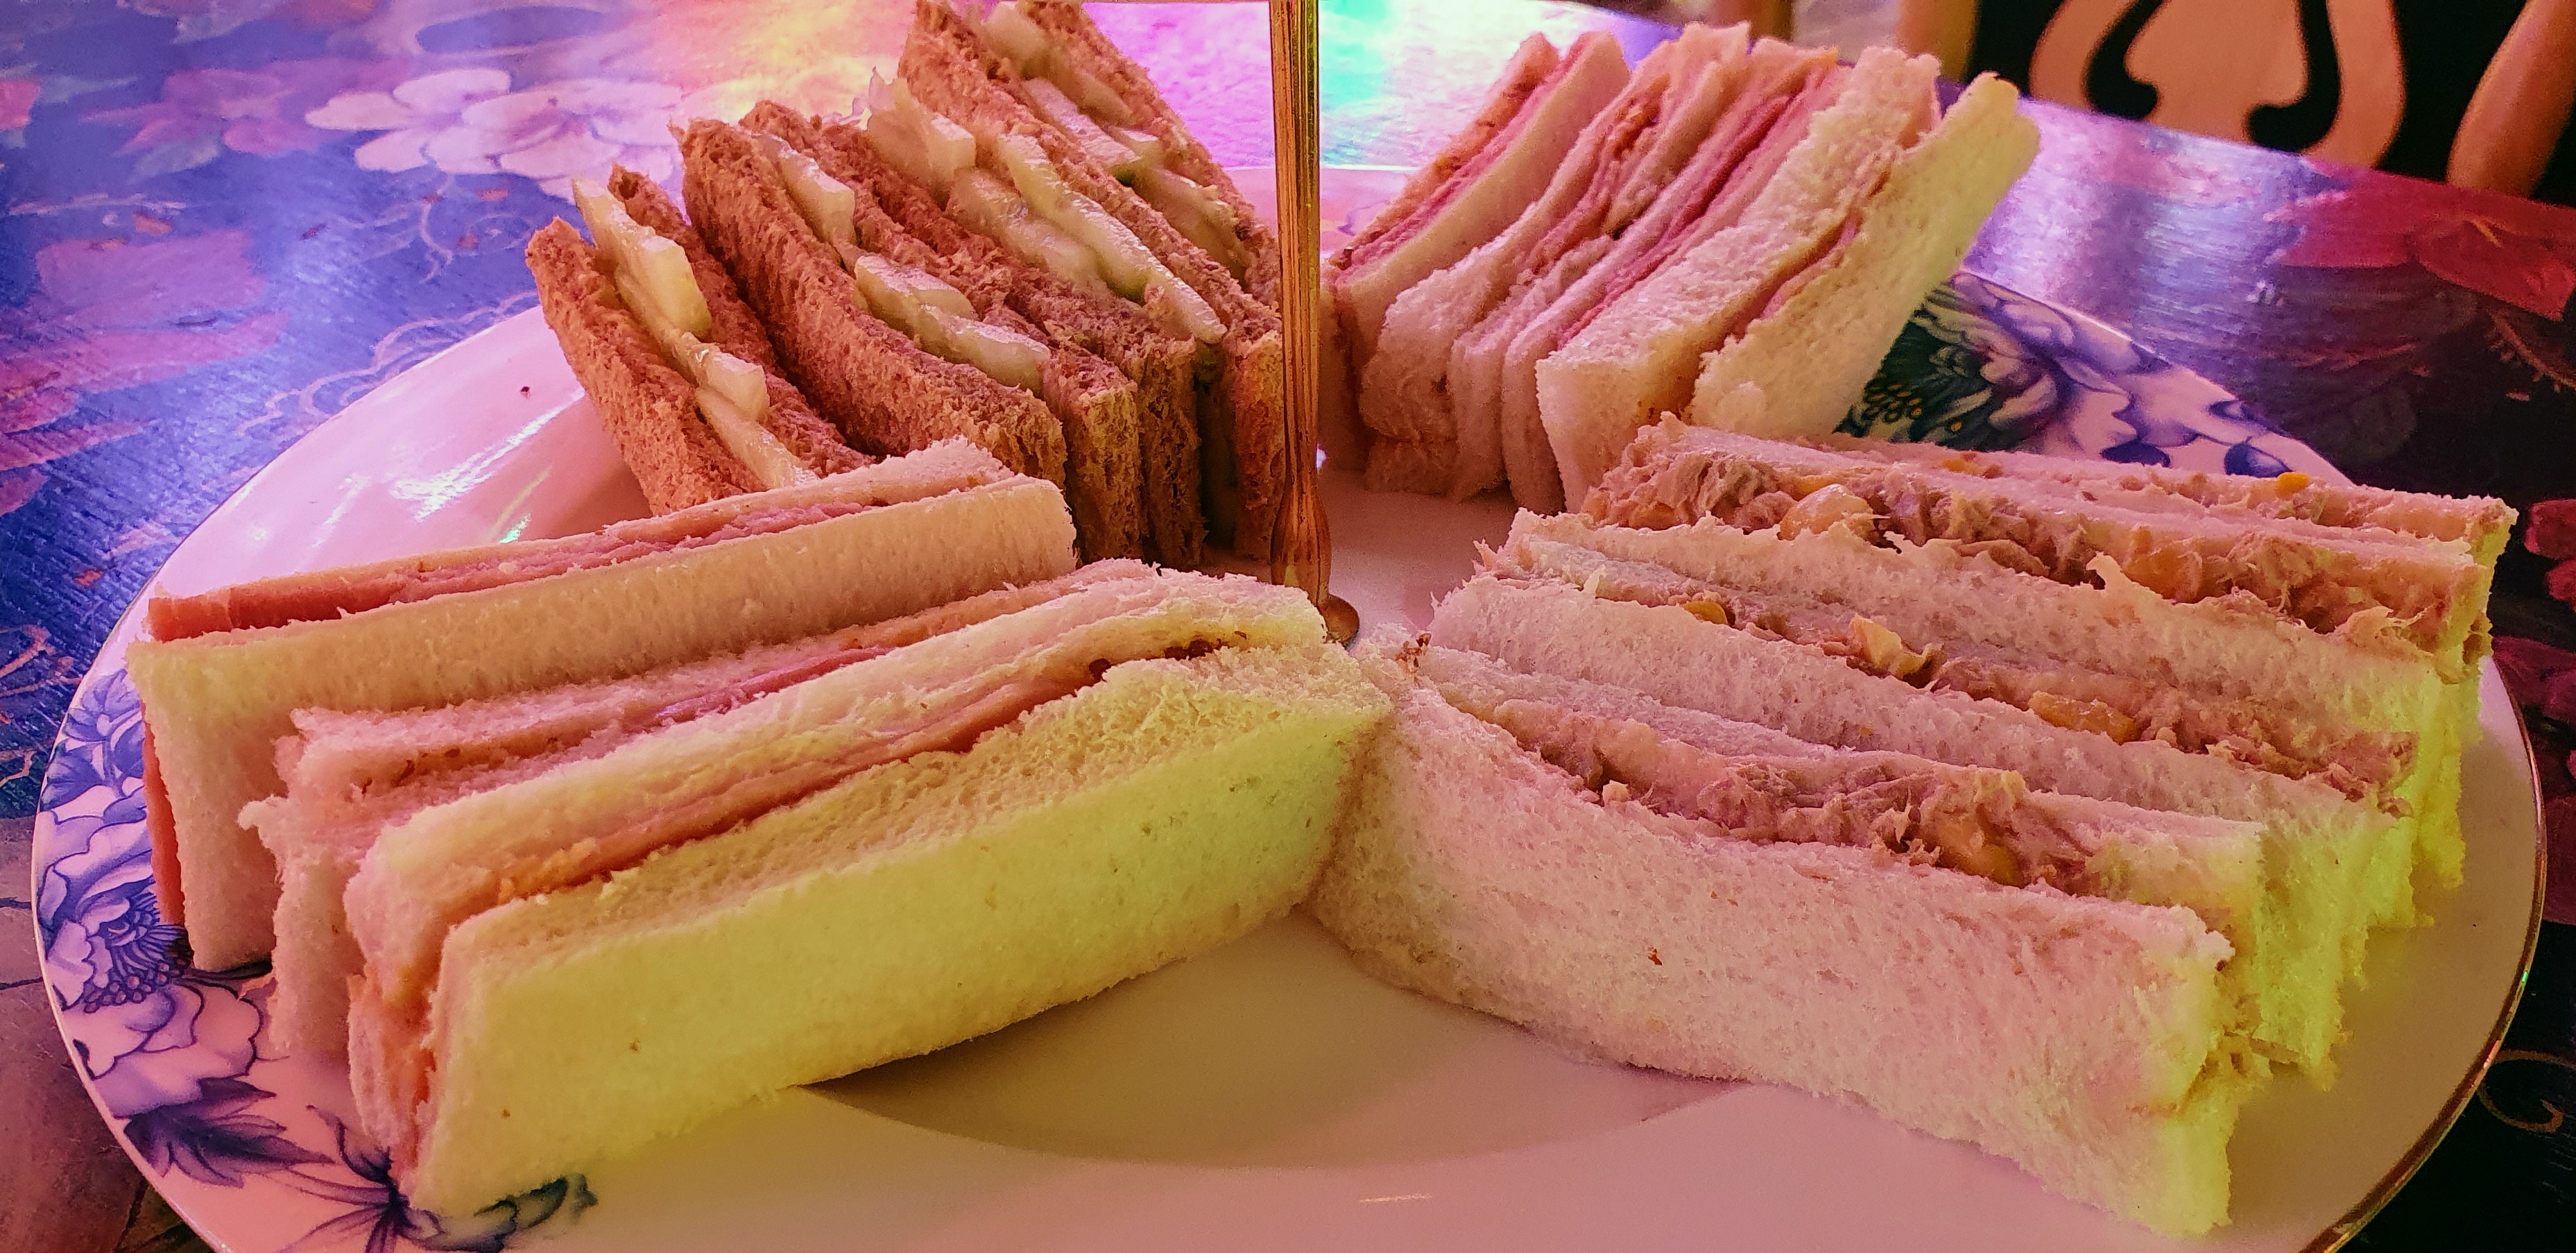 Finger sandwiches at The Rolling Scones Café, God's Own Junkyard, Walthamstow, London